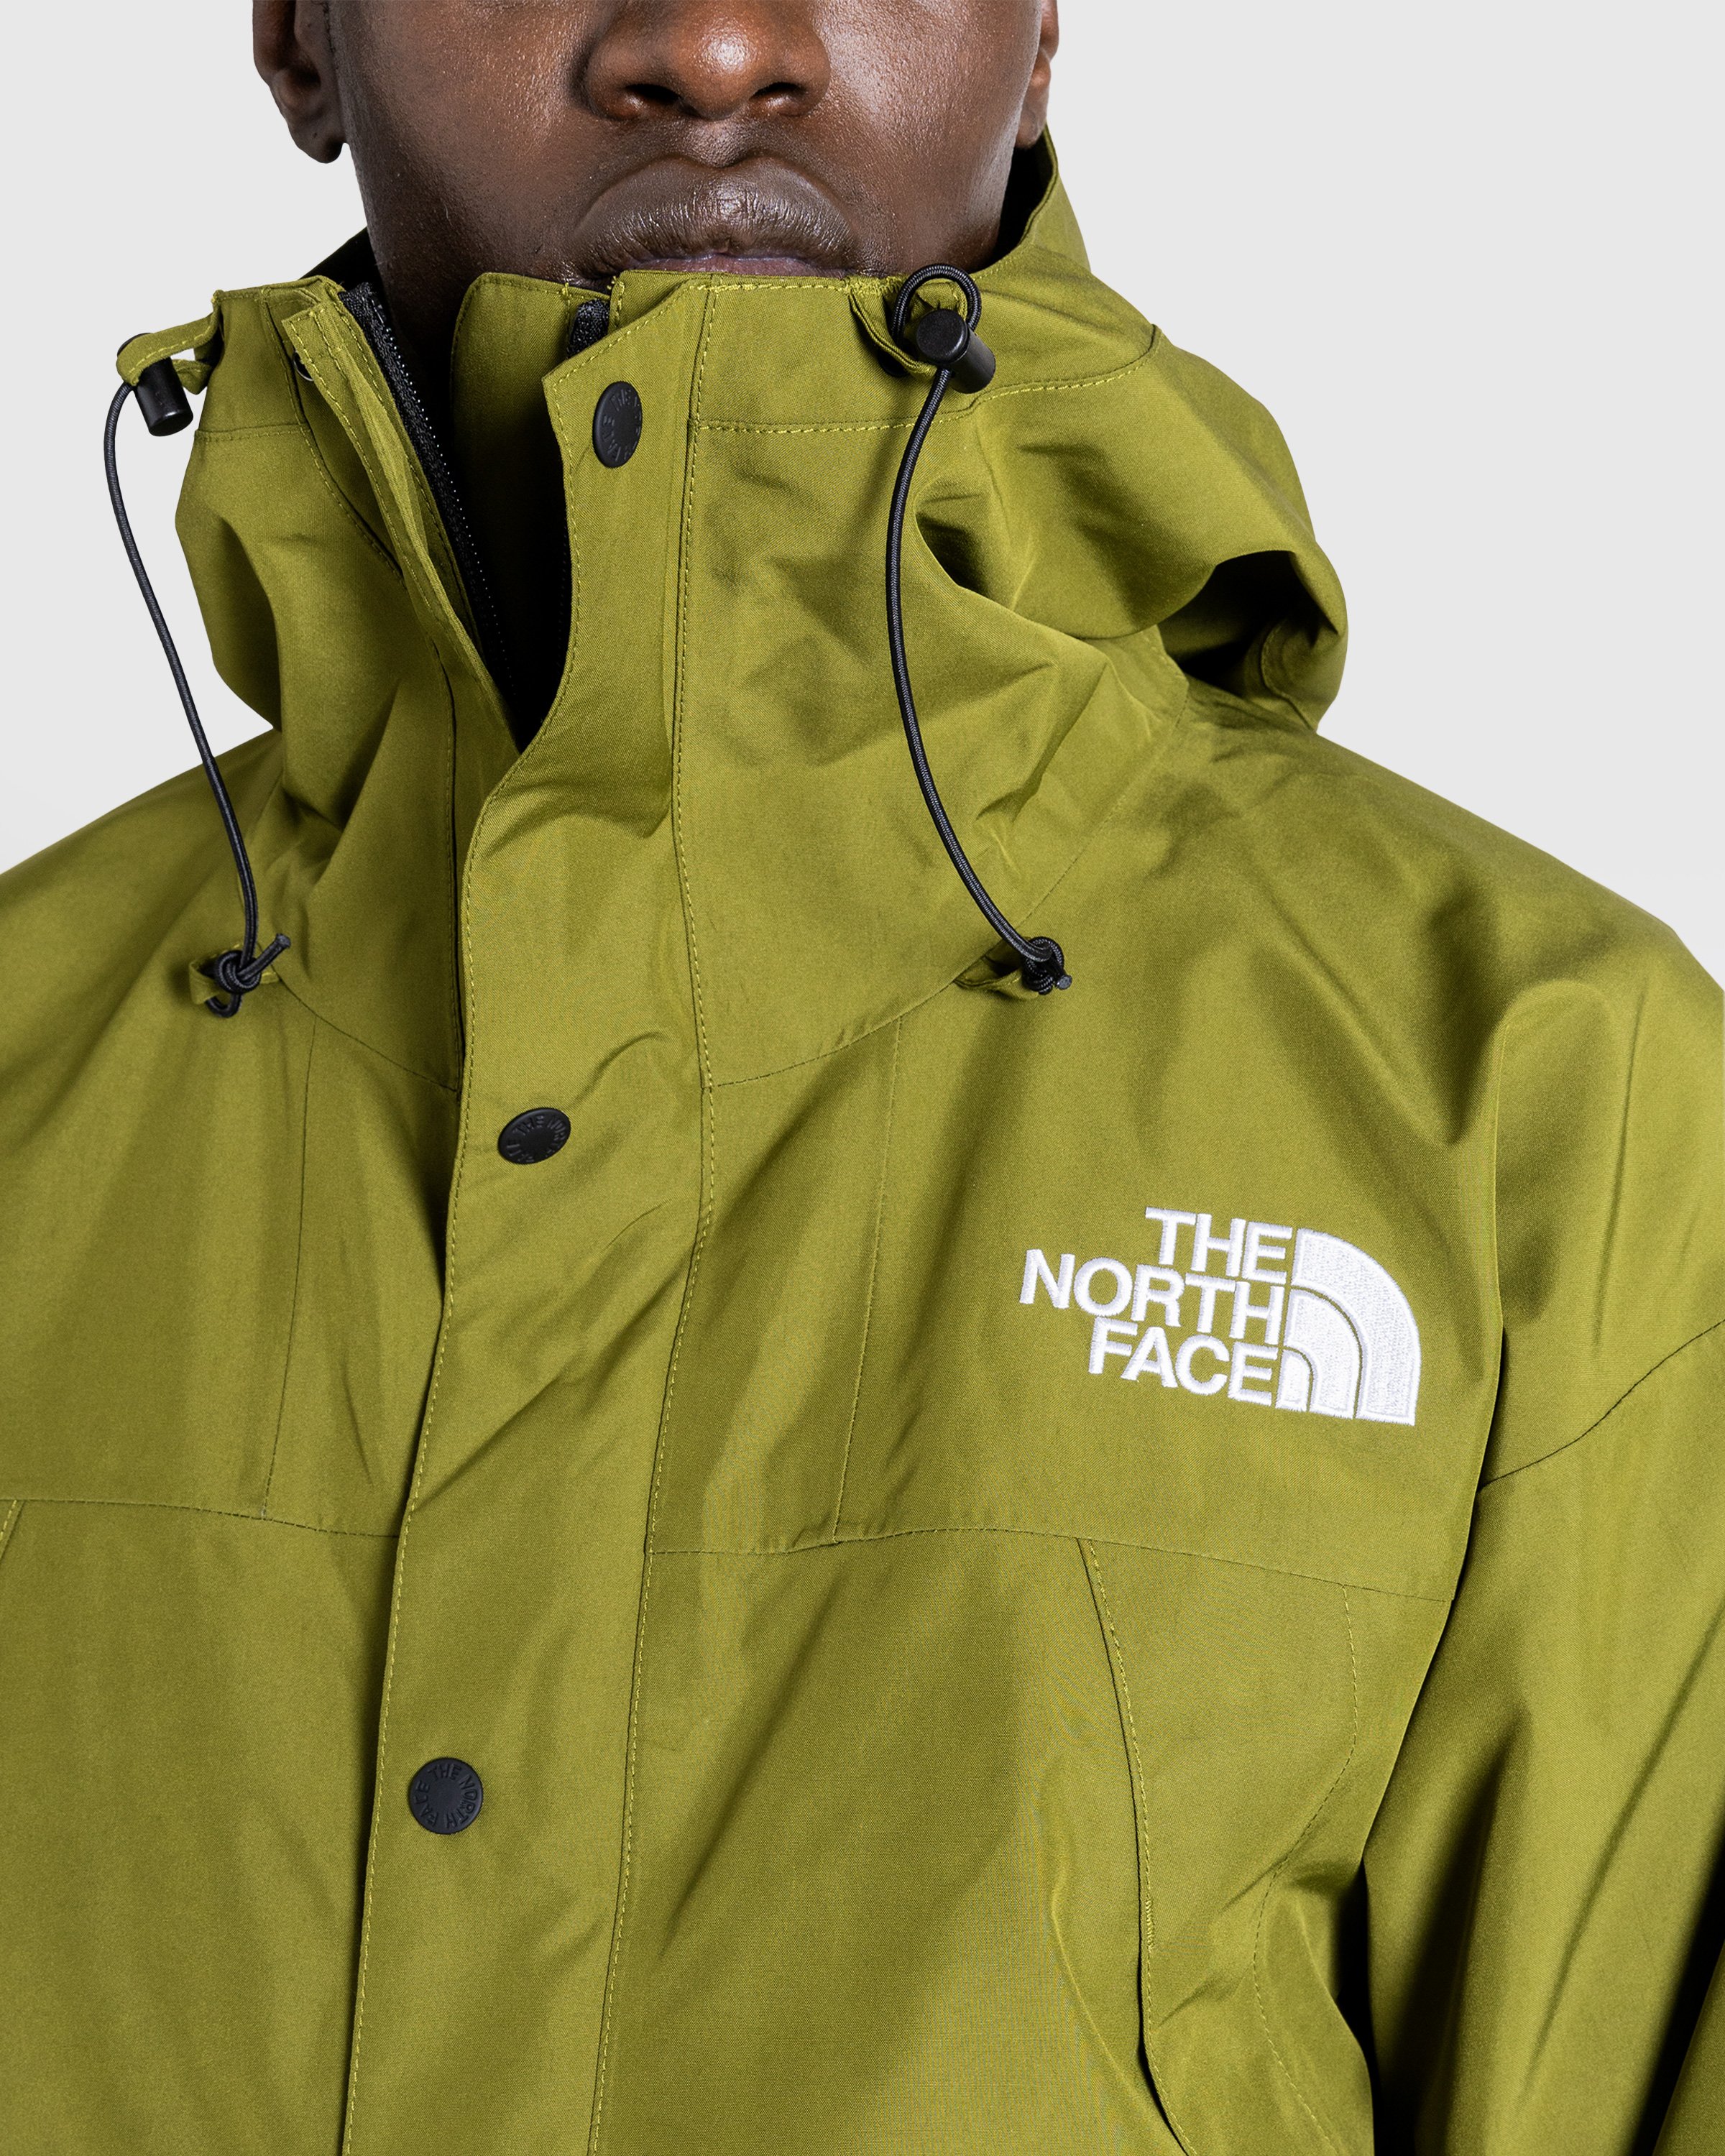 The North Face - M GTX MOUNTAIN JACKET FOREST OLIVE - Clothing - Green - Image 5